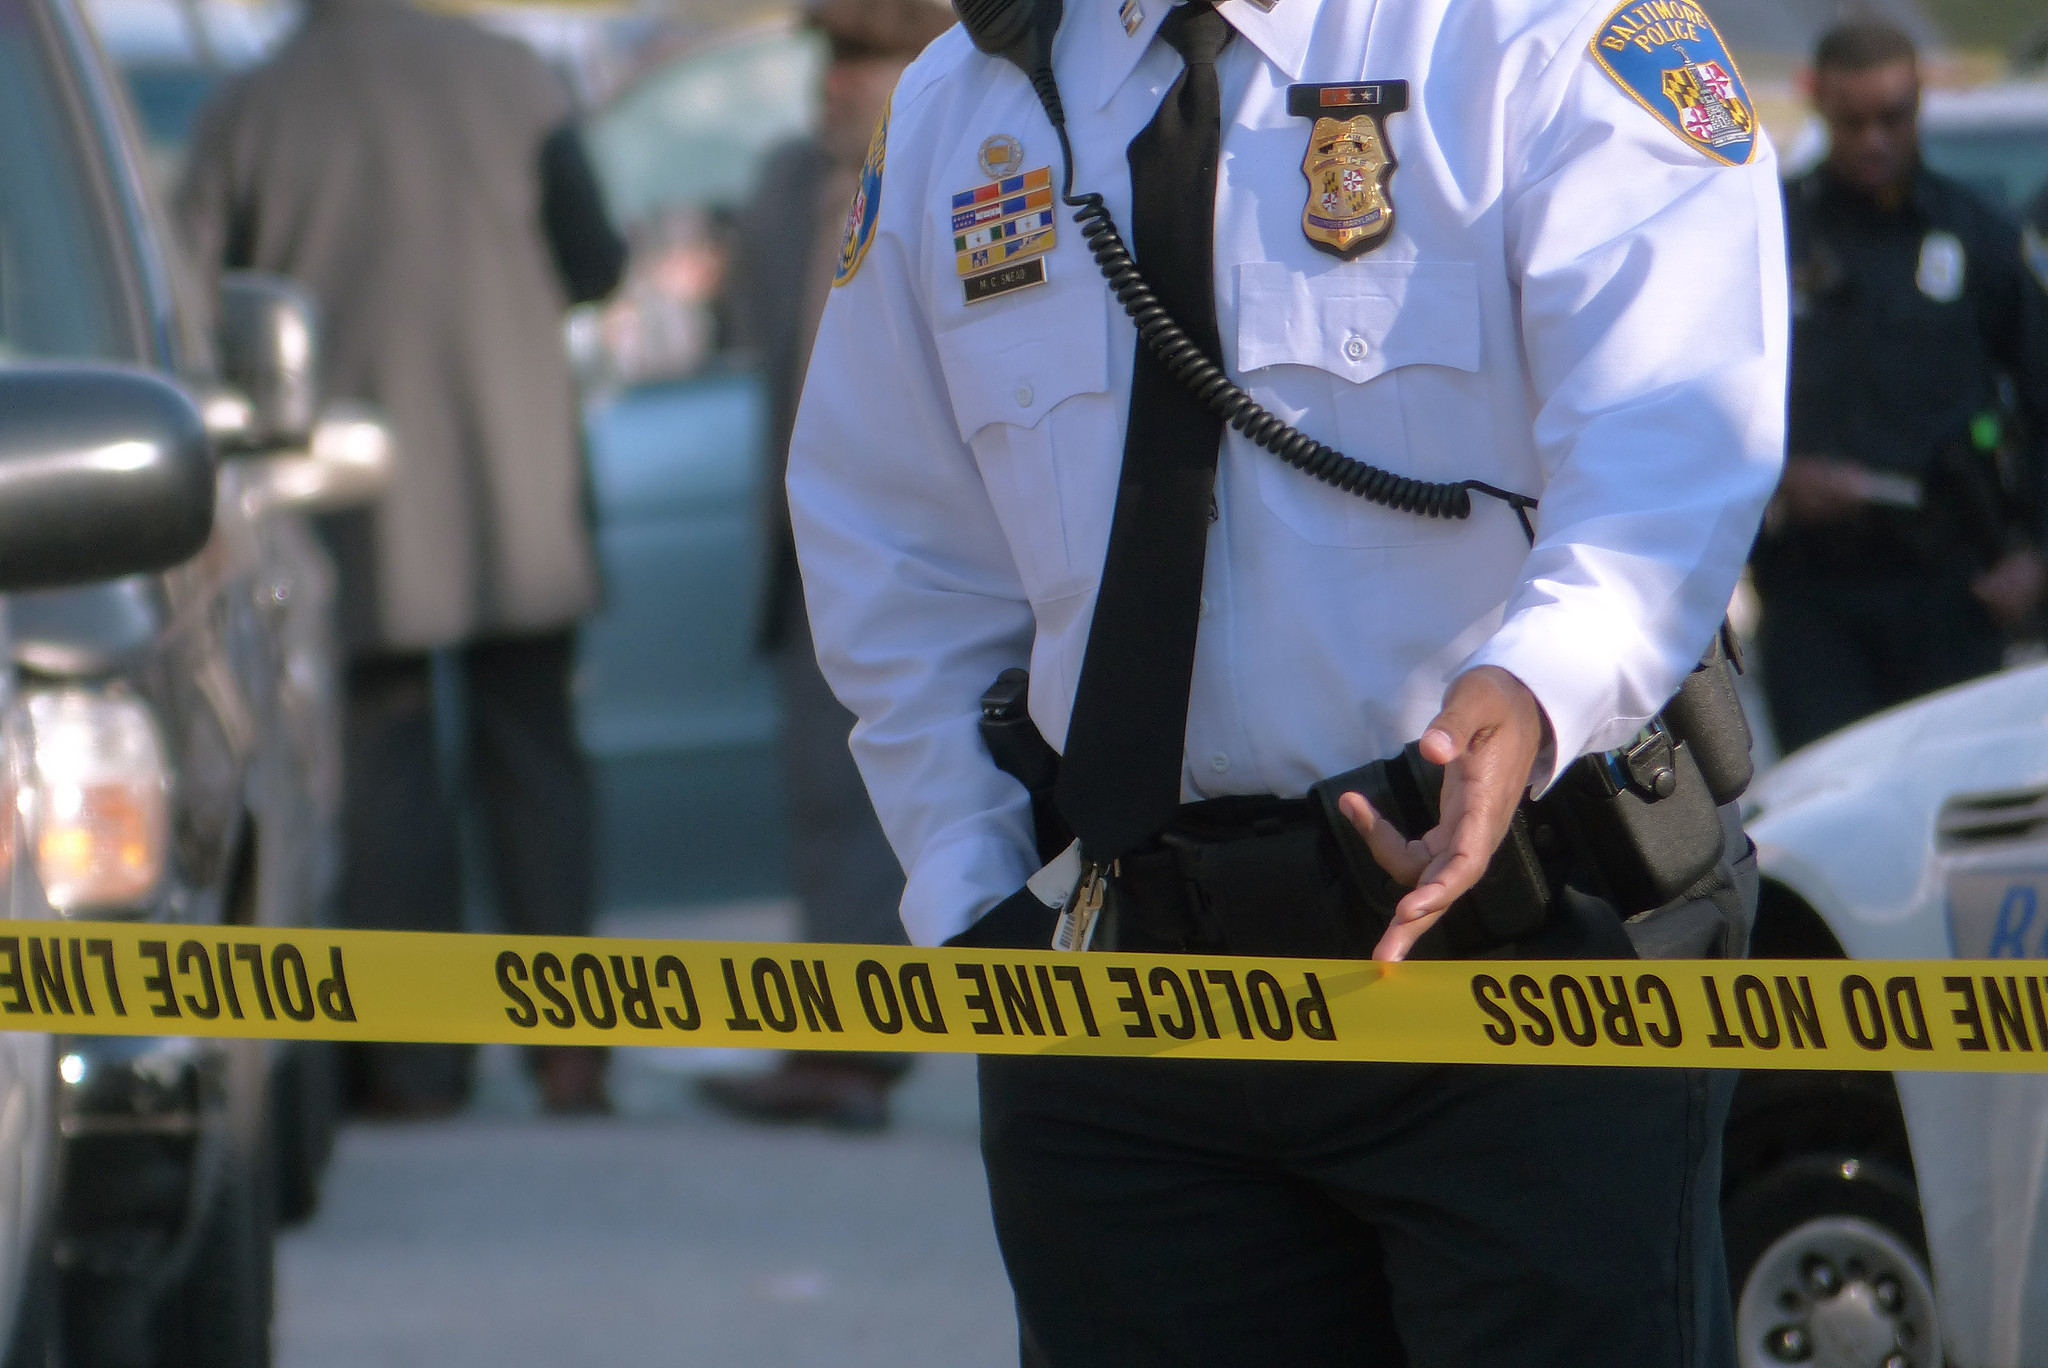 Two killed in Baltimore shootings Monday